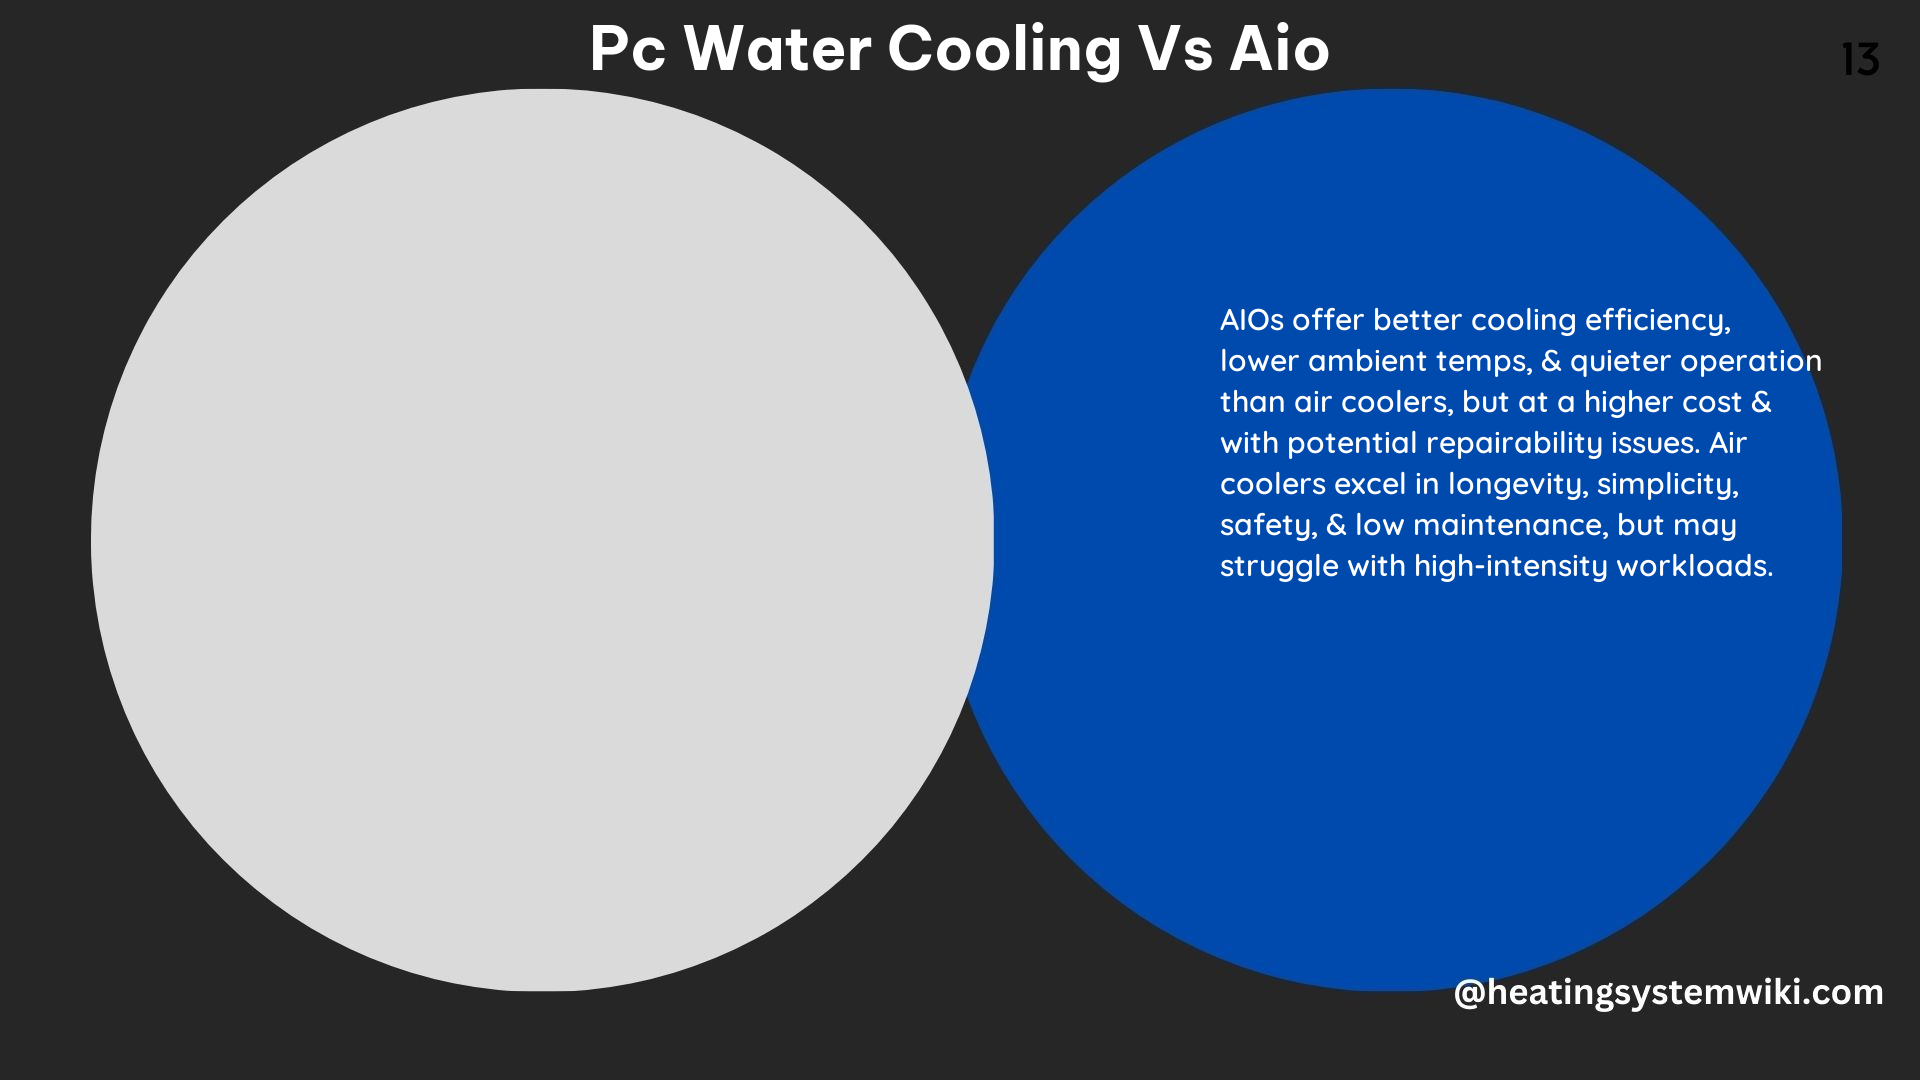 PC Water Cooling vs Aio